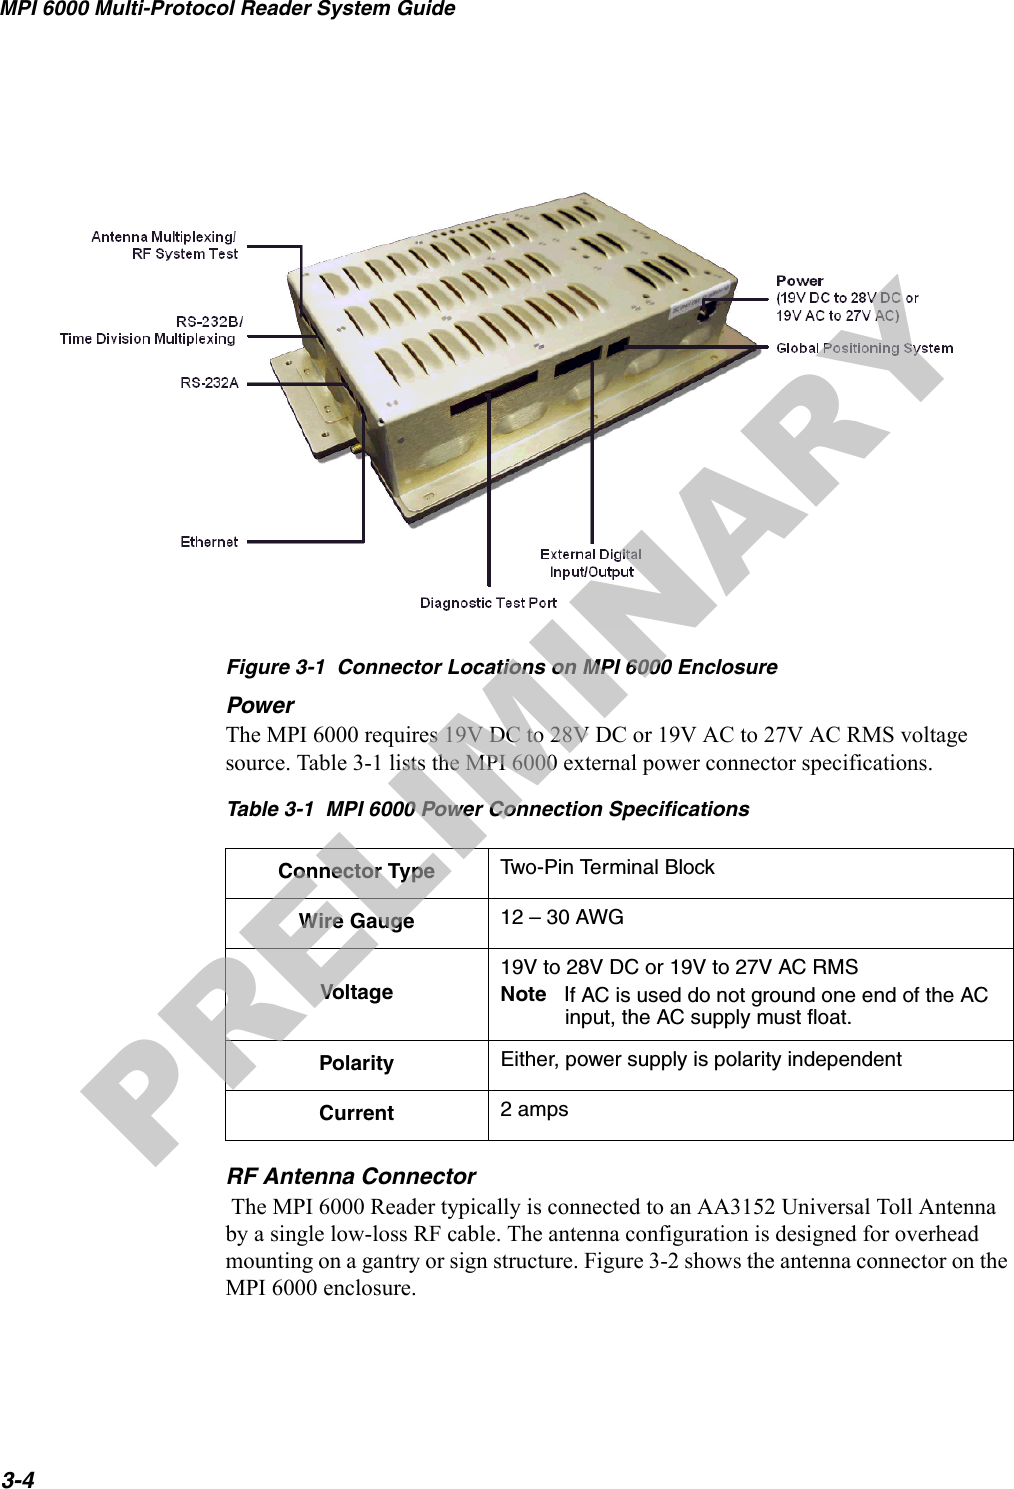 MPI 6000 Multi-Protocol Reader System Guide3-4Figure 3-1  Connector Locations on MPI 6000 EnclosurePowerThe MPI 6000 requires 19V DC to 28V DC or 19V AC to 27V AC RMS voltage source. Table 3-1 lists the MPI 6000 external power connector specifications.RF Antenna Connector The MPI 6000 Reader typically is connected to an AA3152 Universal Toll Antenna by a single low-loss RF cable. The antenna configuration is designed for overhead mounting on a gantry or sign structure. Figure 3-2 shows the antenna connector on the MPI 6000 enclosure.Table 3-1  MPI 6000 Power Connection SpecificationsConnector Type Two-Pin Terminal Block Wire Gauge 12 – 30 AWGVoltage19V to 28V DC or 19V to 27V AC RMSNote   If AC is used do not ground one end of the AC input, the AC supply must float.Polarity Either, power supply is polarity independentCurrent 2 ampsPRELIMINARY